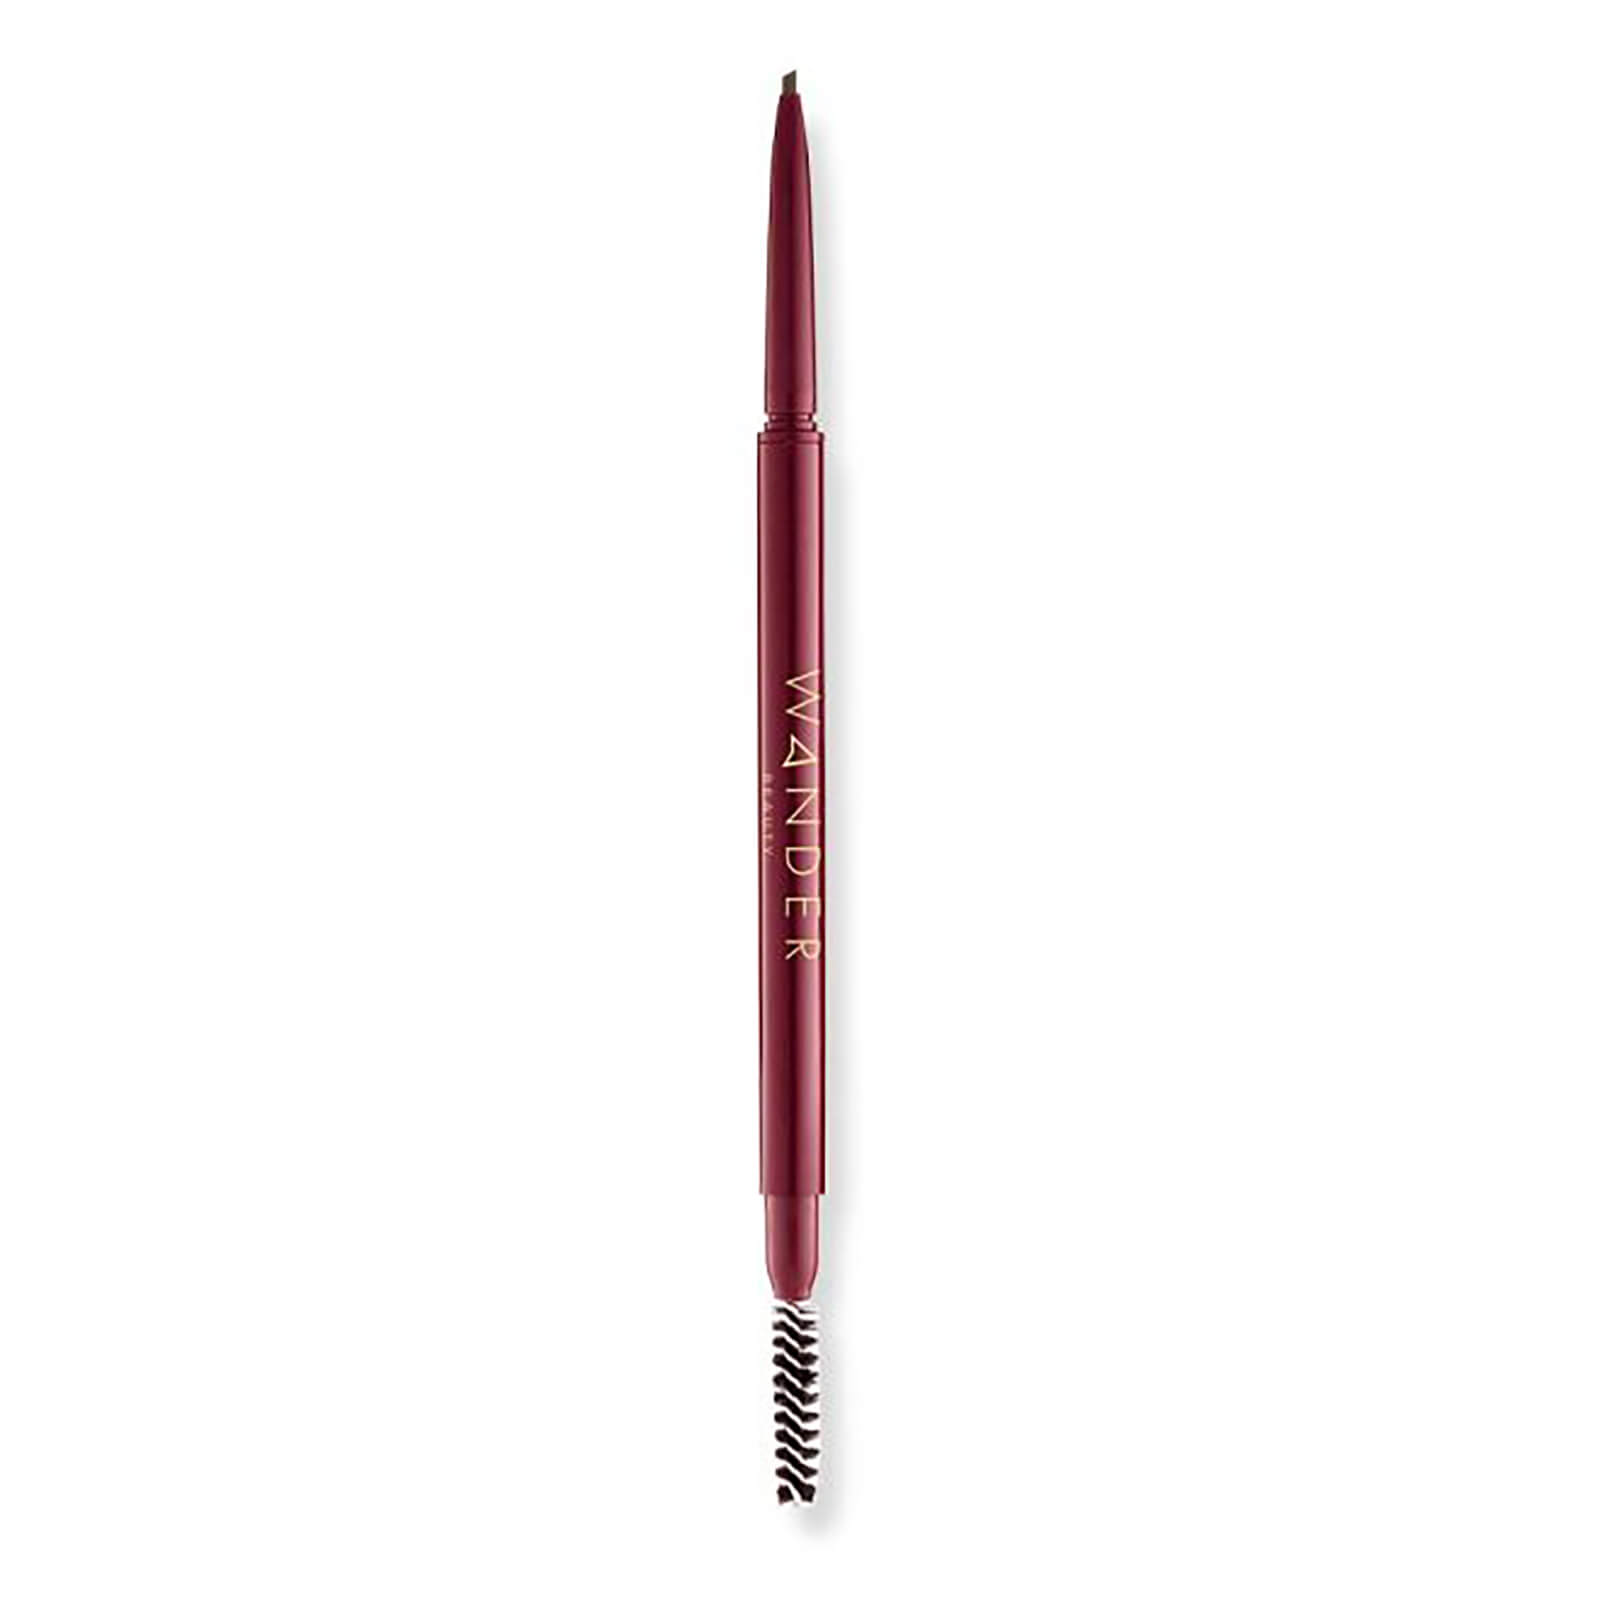 Wander Beauty Frame your Face Micro Brow Pencil 0.003 oz (Various Shades) - Taupe